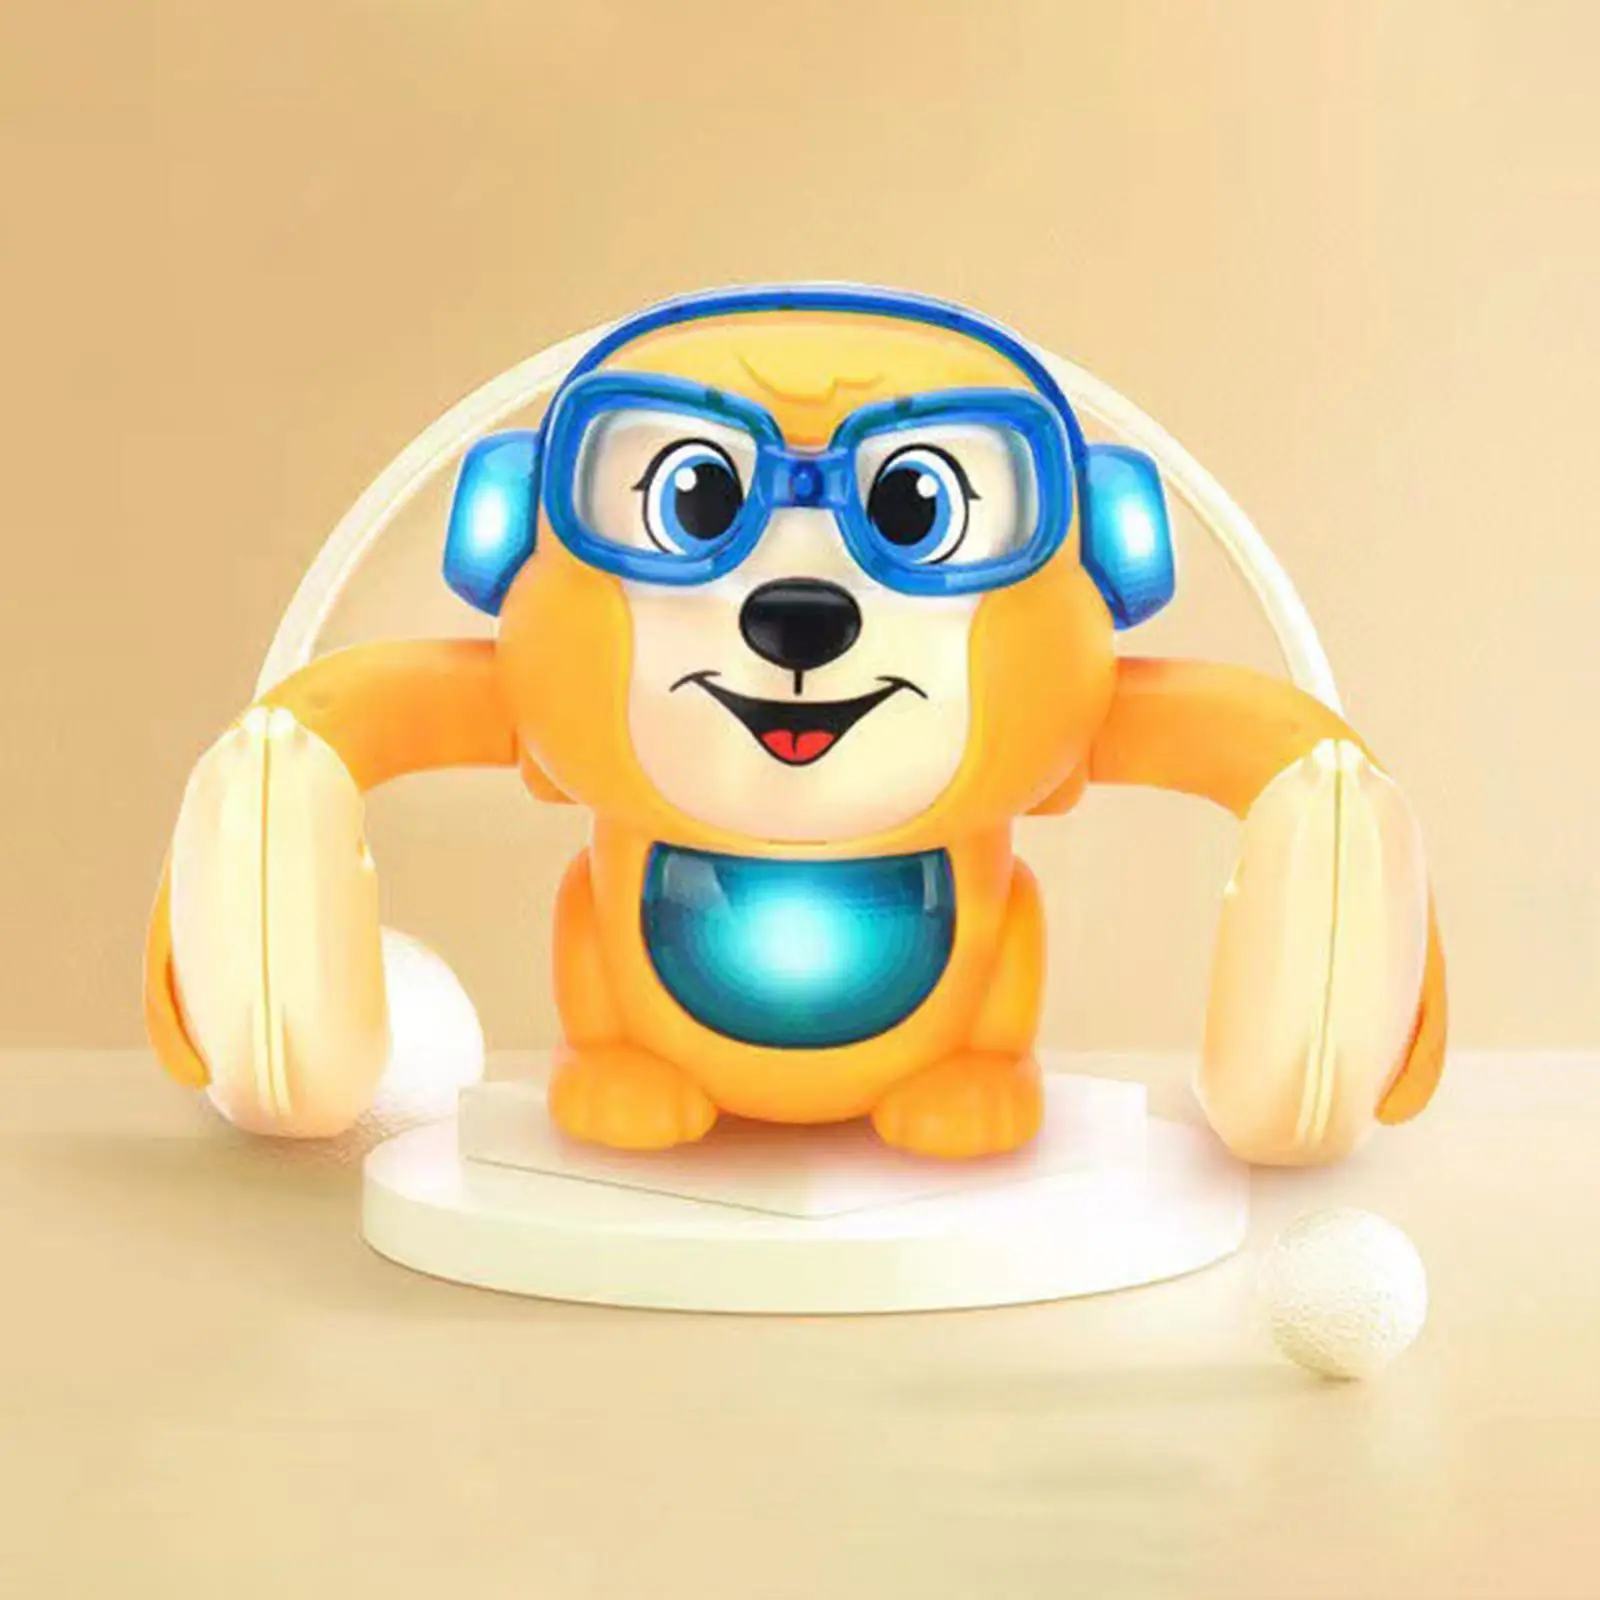  Musical Toys 360 Crawling Baby Toy with Music Light for 6 Months and up Children Infants Birthday Gifts